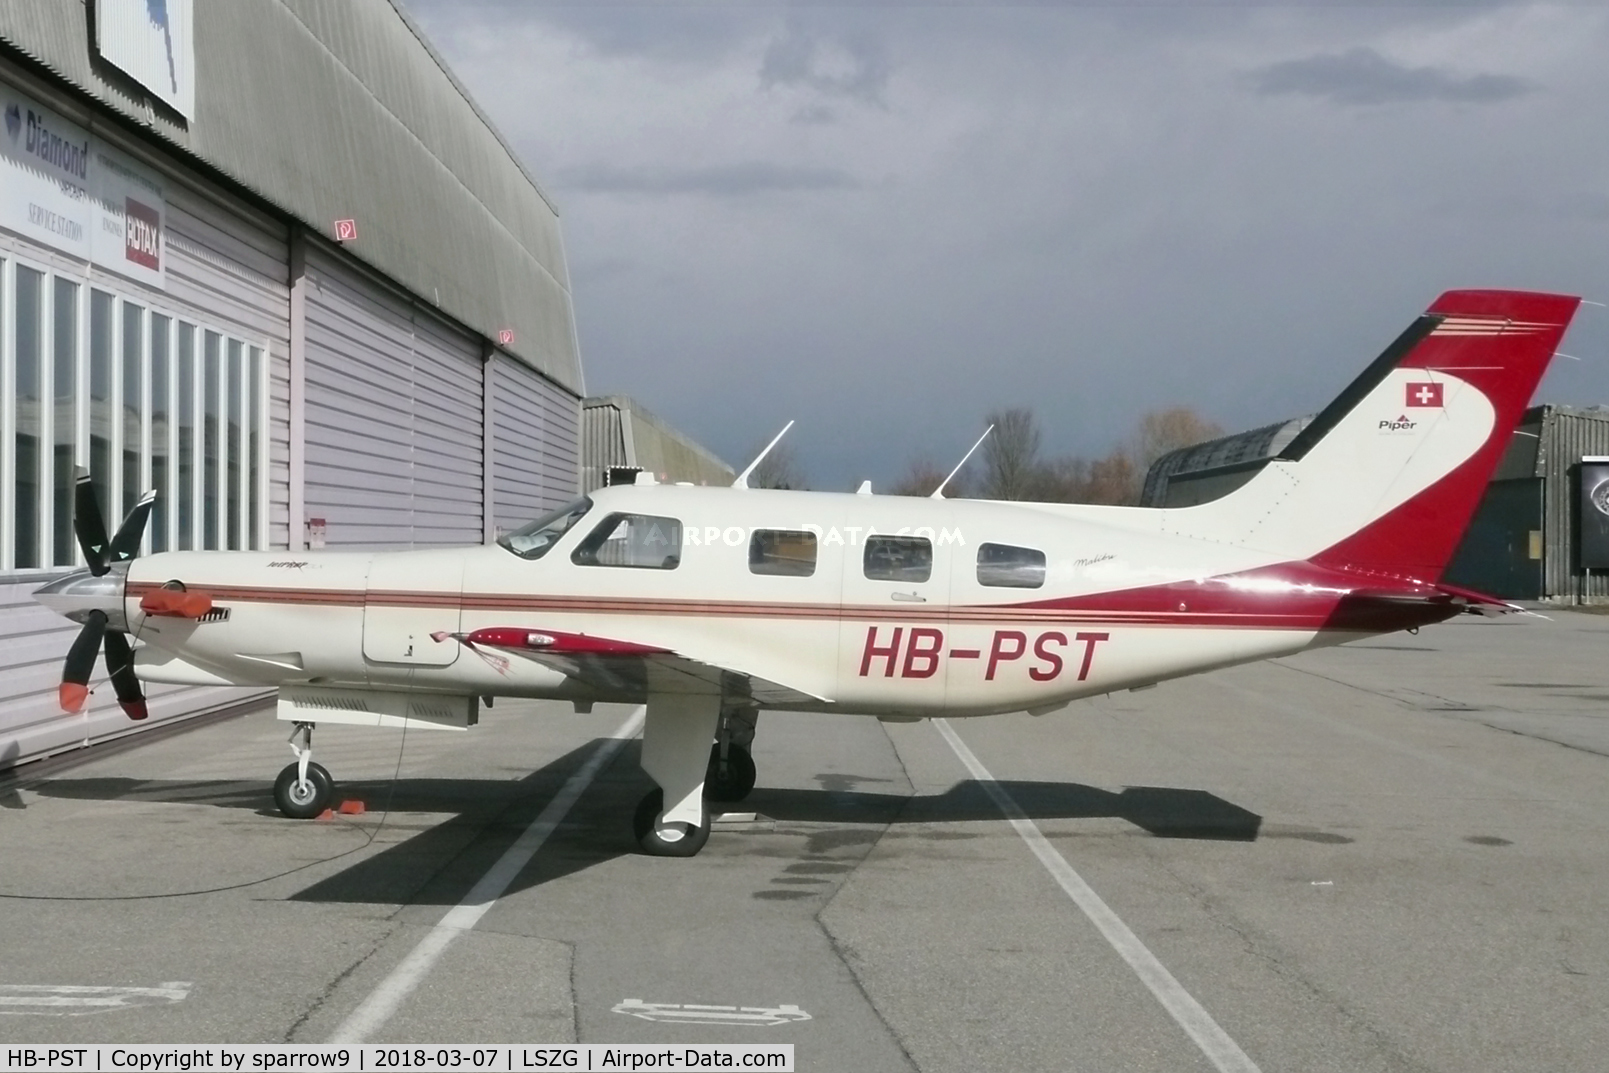 HB-PST, 1998 Piper PA-46-350P Malibu Mirage C/N 4636142, Again maintenance at Grenchen. HB-registered since 2013-04-16.